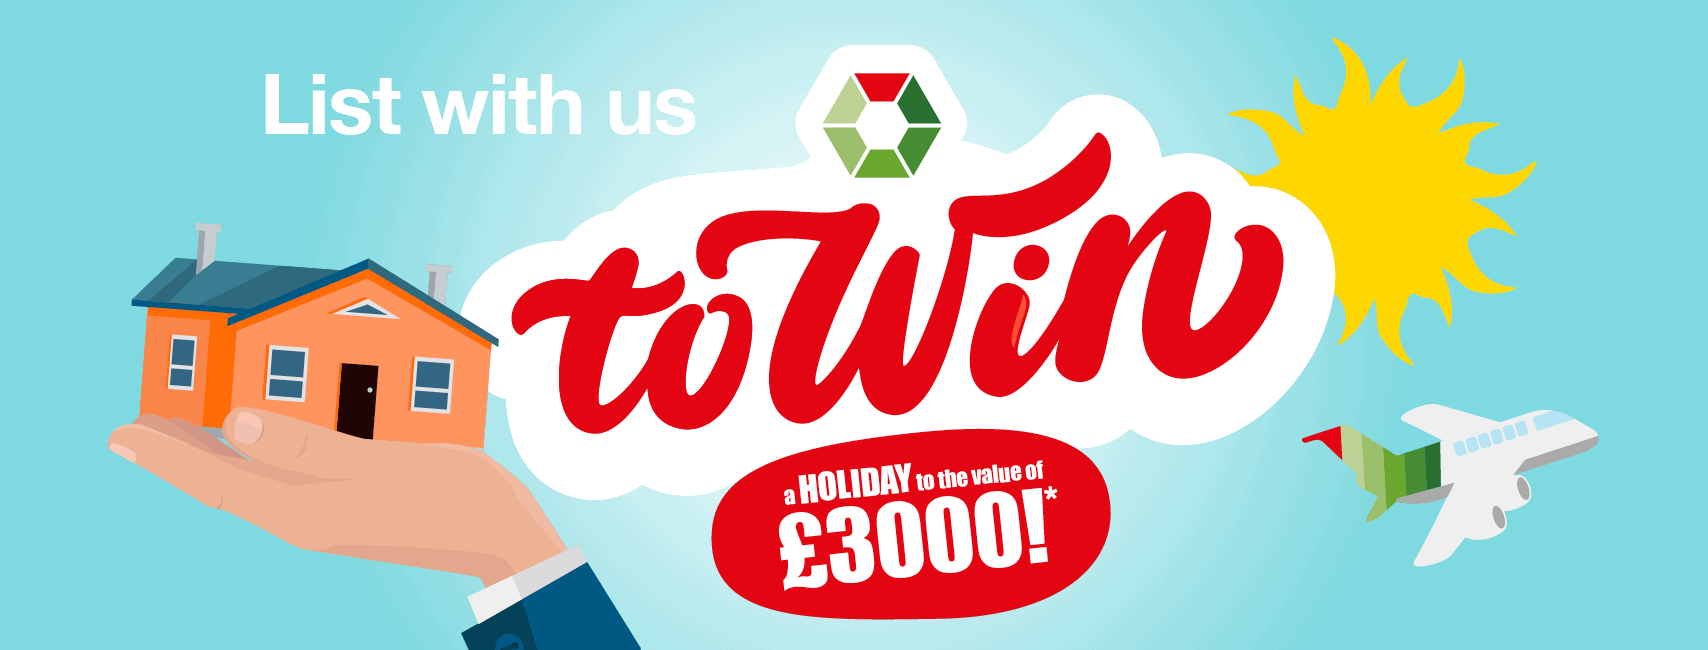 List your property with Swoffers for the chance to win £3000!